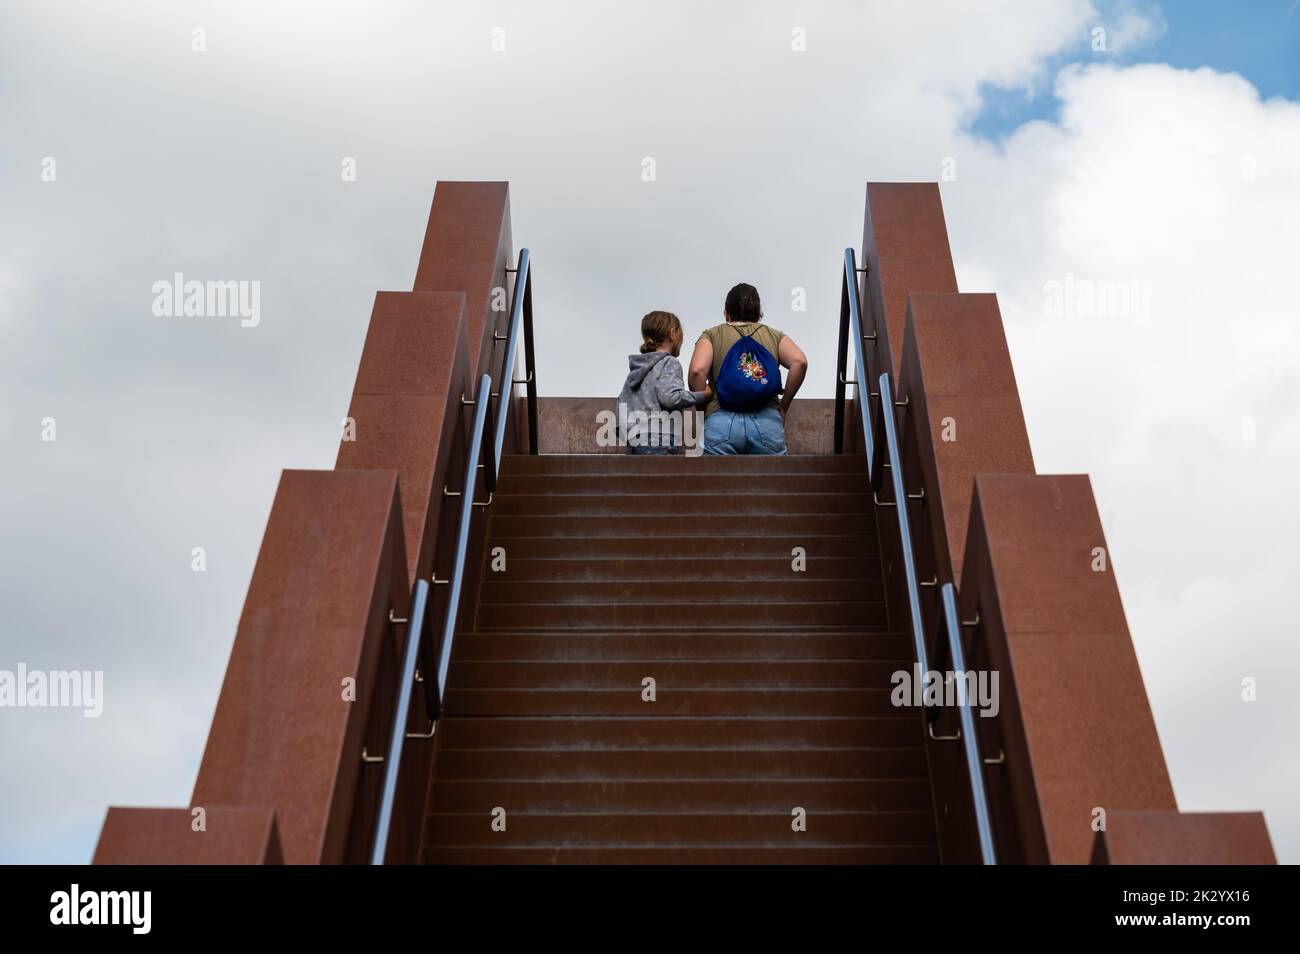 Tielt-Winge, Flemish Brabant, Belgium,  08 22 2022 - Mother and daughter at an observation staircase Stock Photo